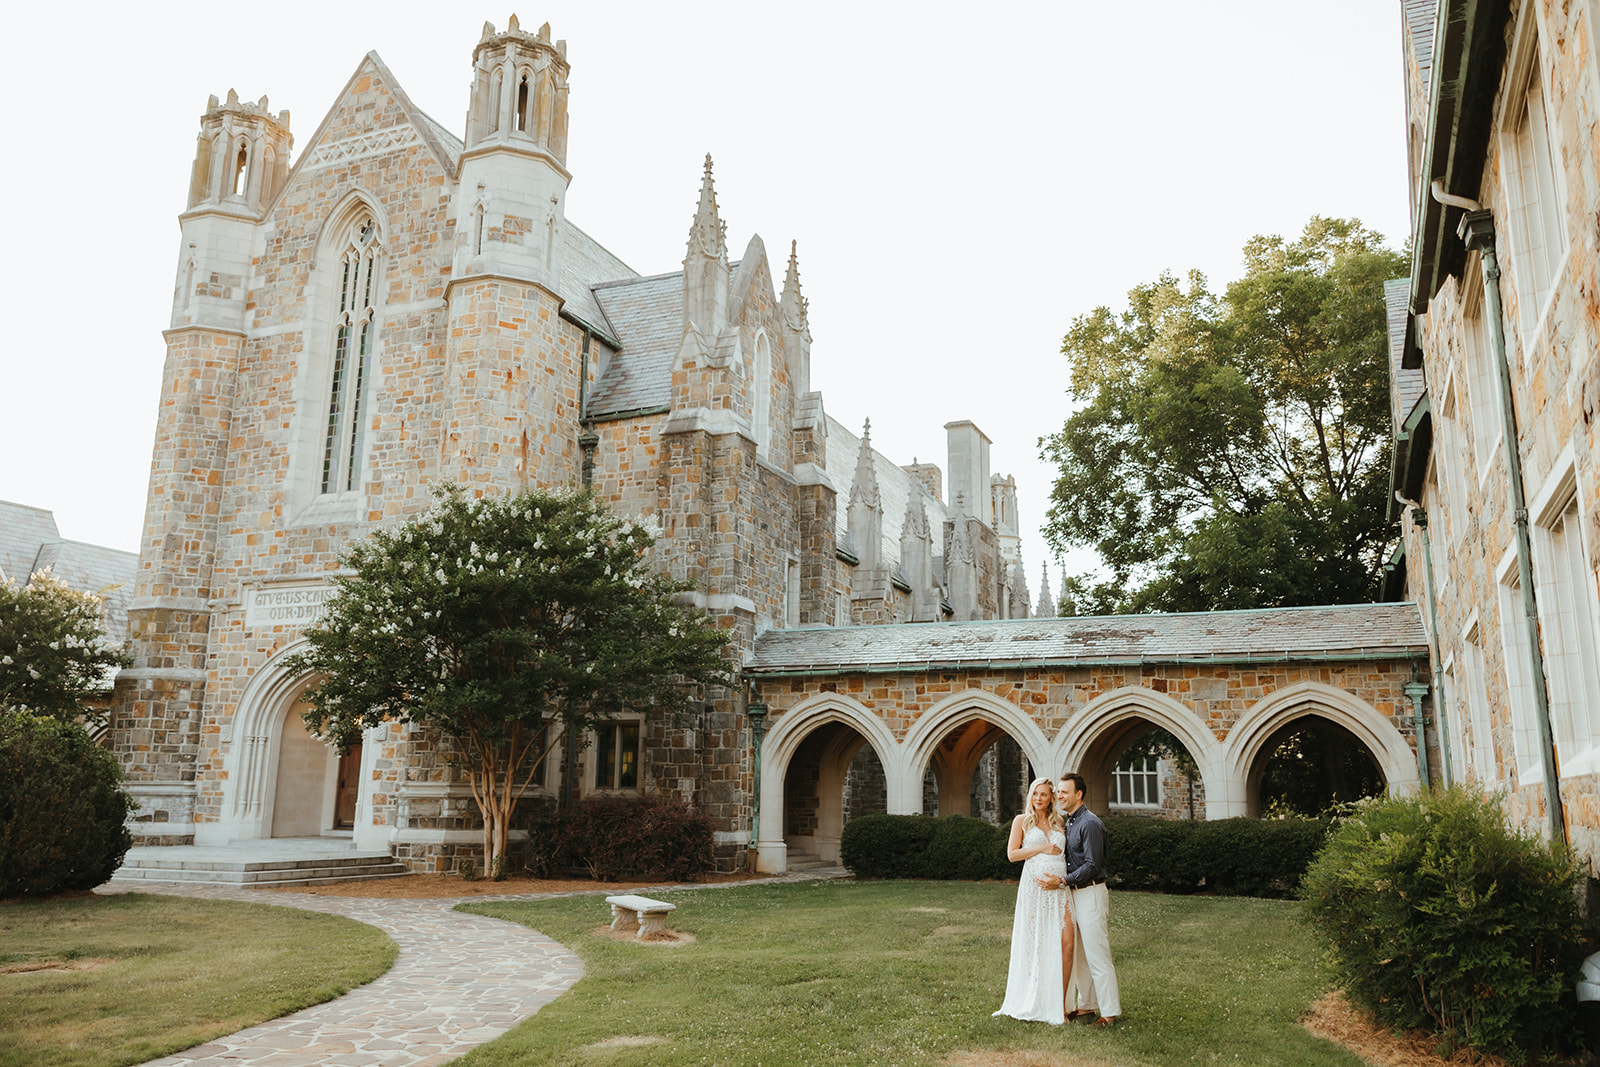 A couple taking maternity photos at Berry College in Rome, GA